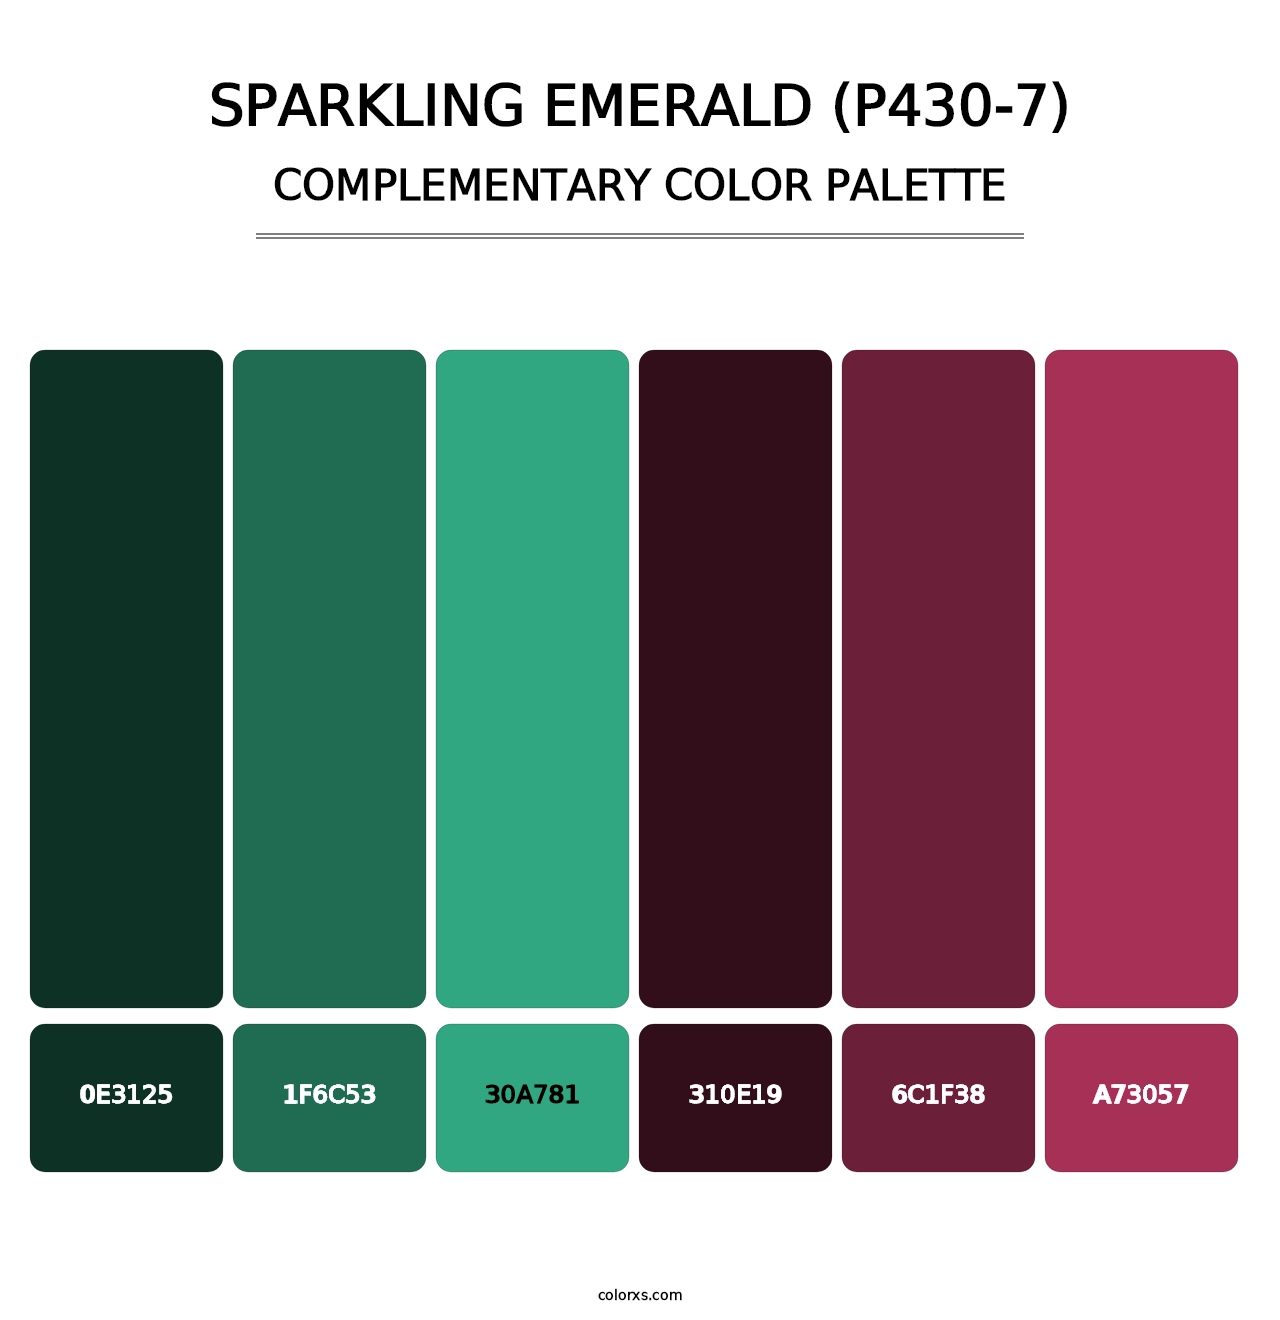 Sparkling Emerald (P430-7) - Complementary Color Palette